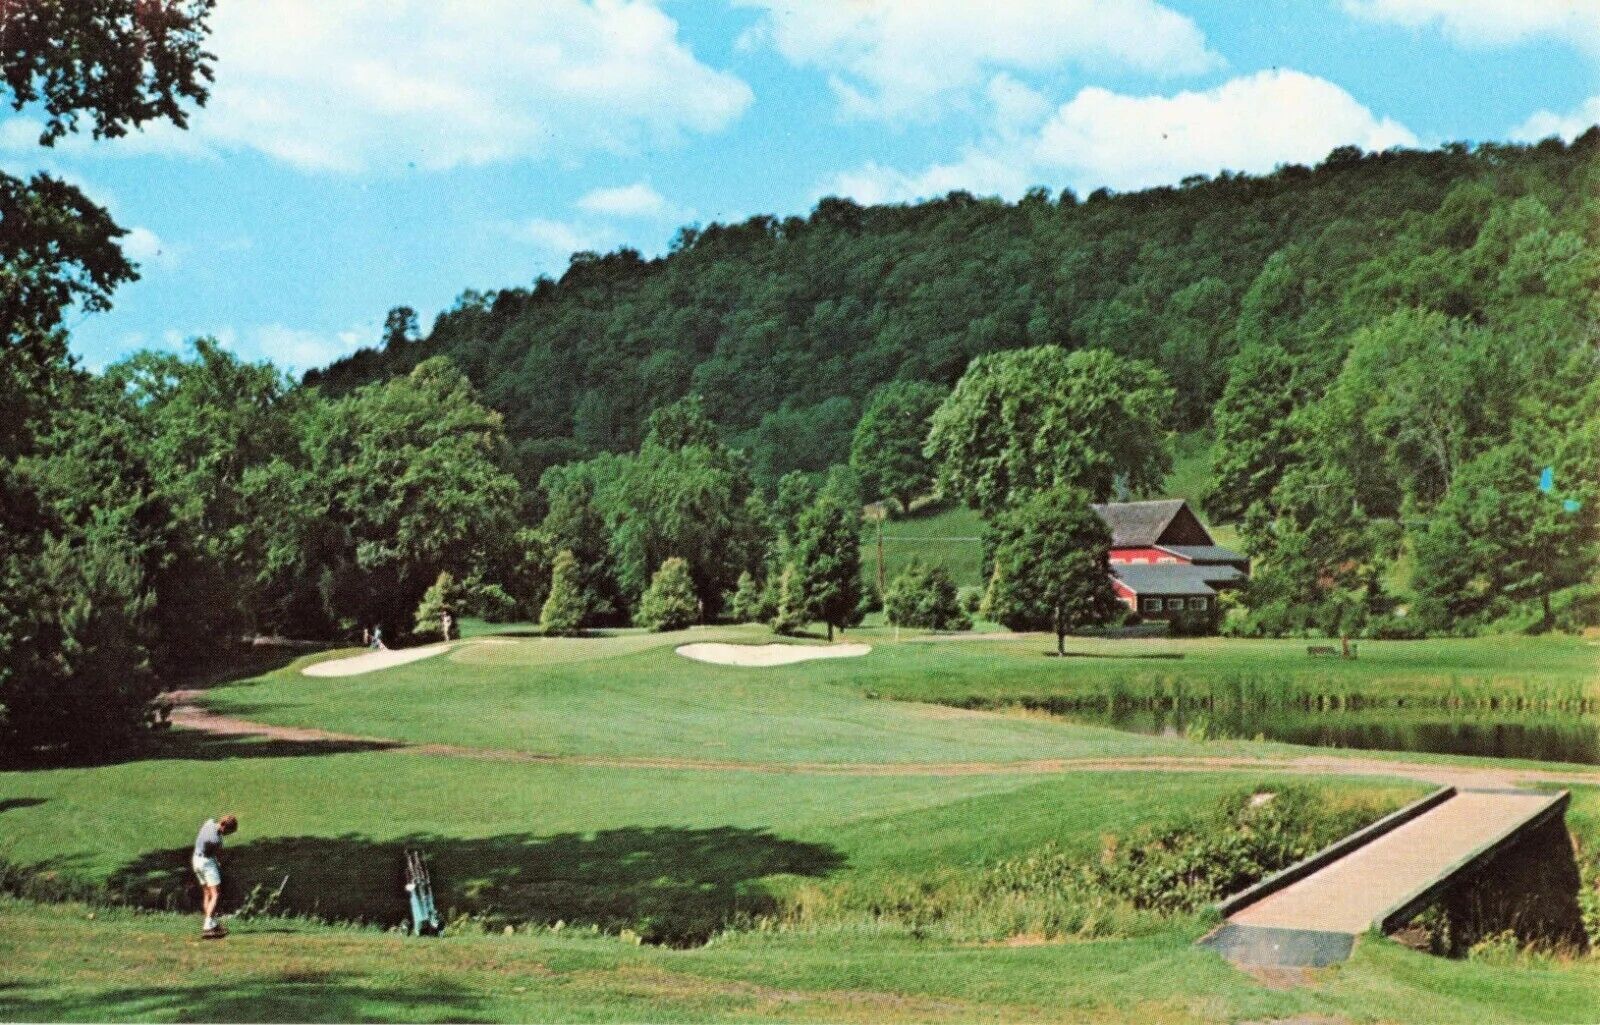 Golfing at Woodstock Country Club - Woodstock Vermont VT - Postcard